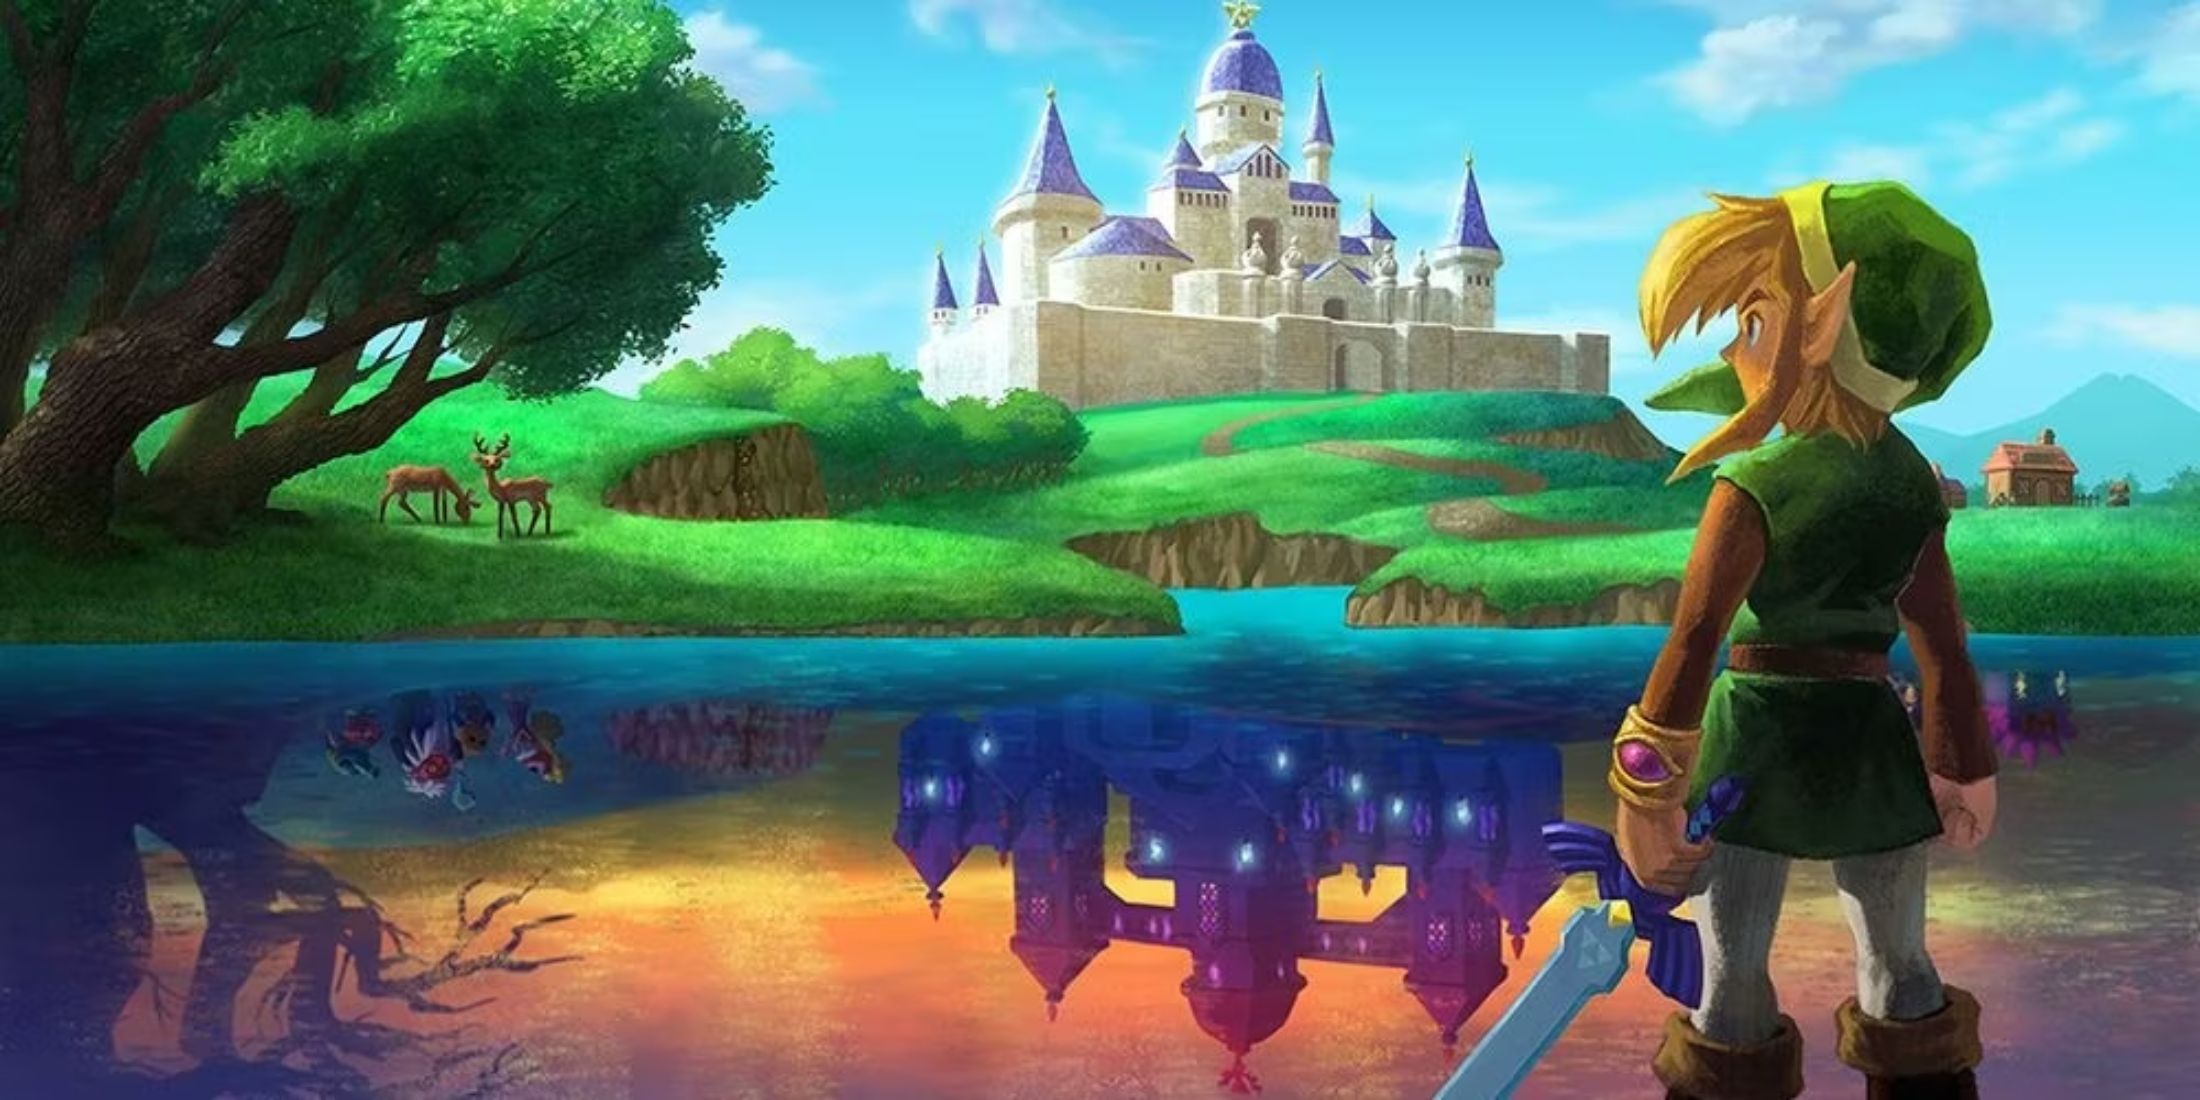 Link looking at Hyrule Castle from across a lake with a reflection of Lorule Castle in the water